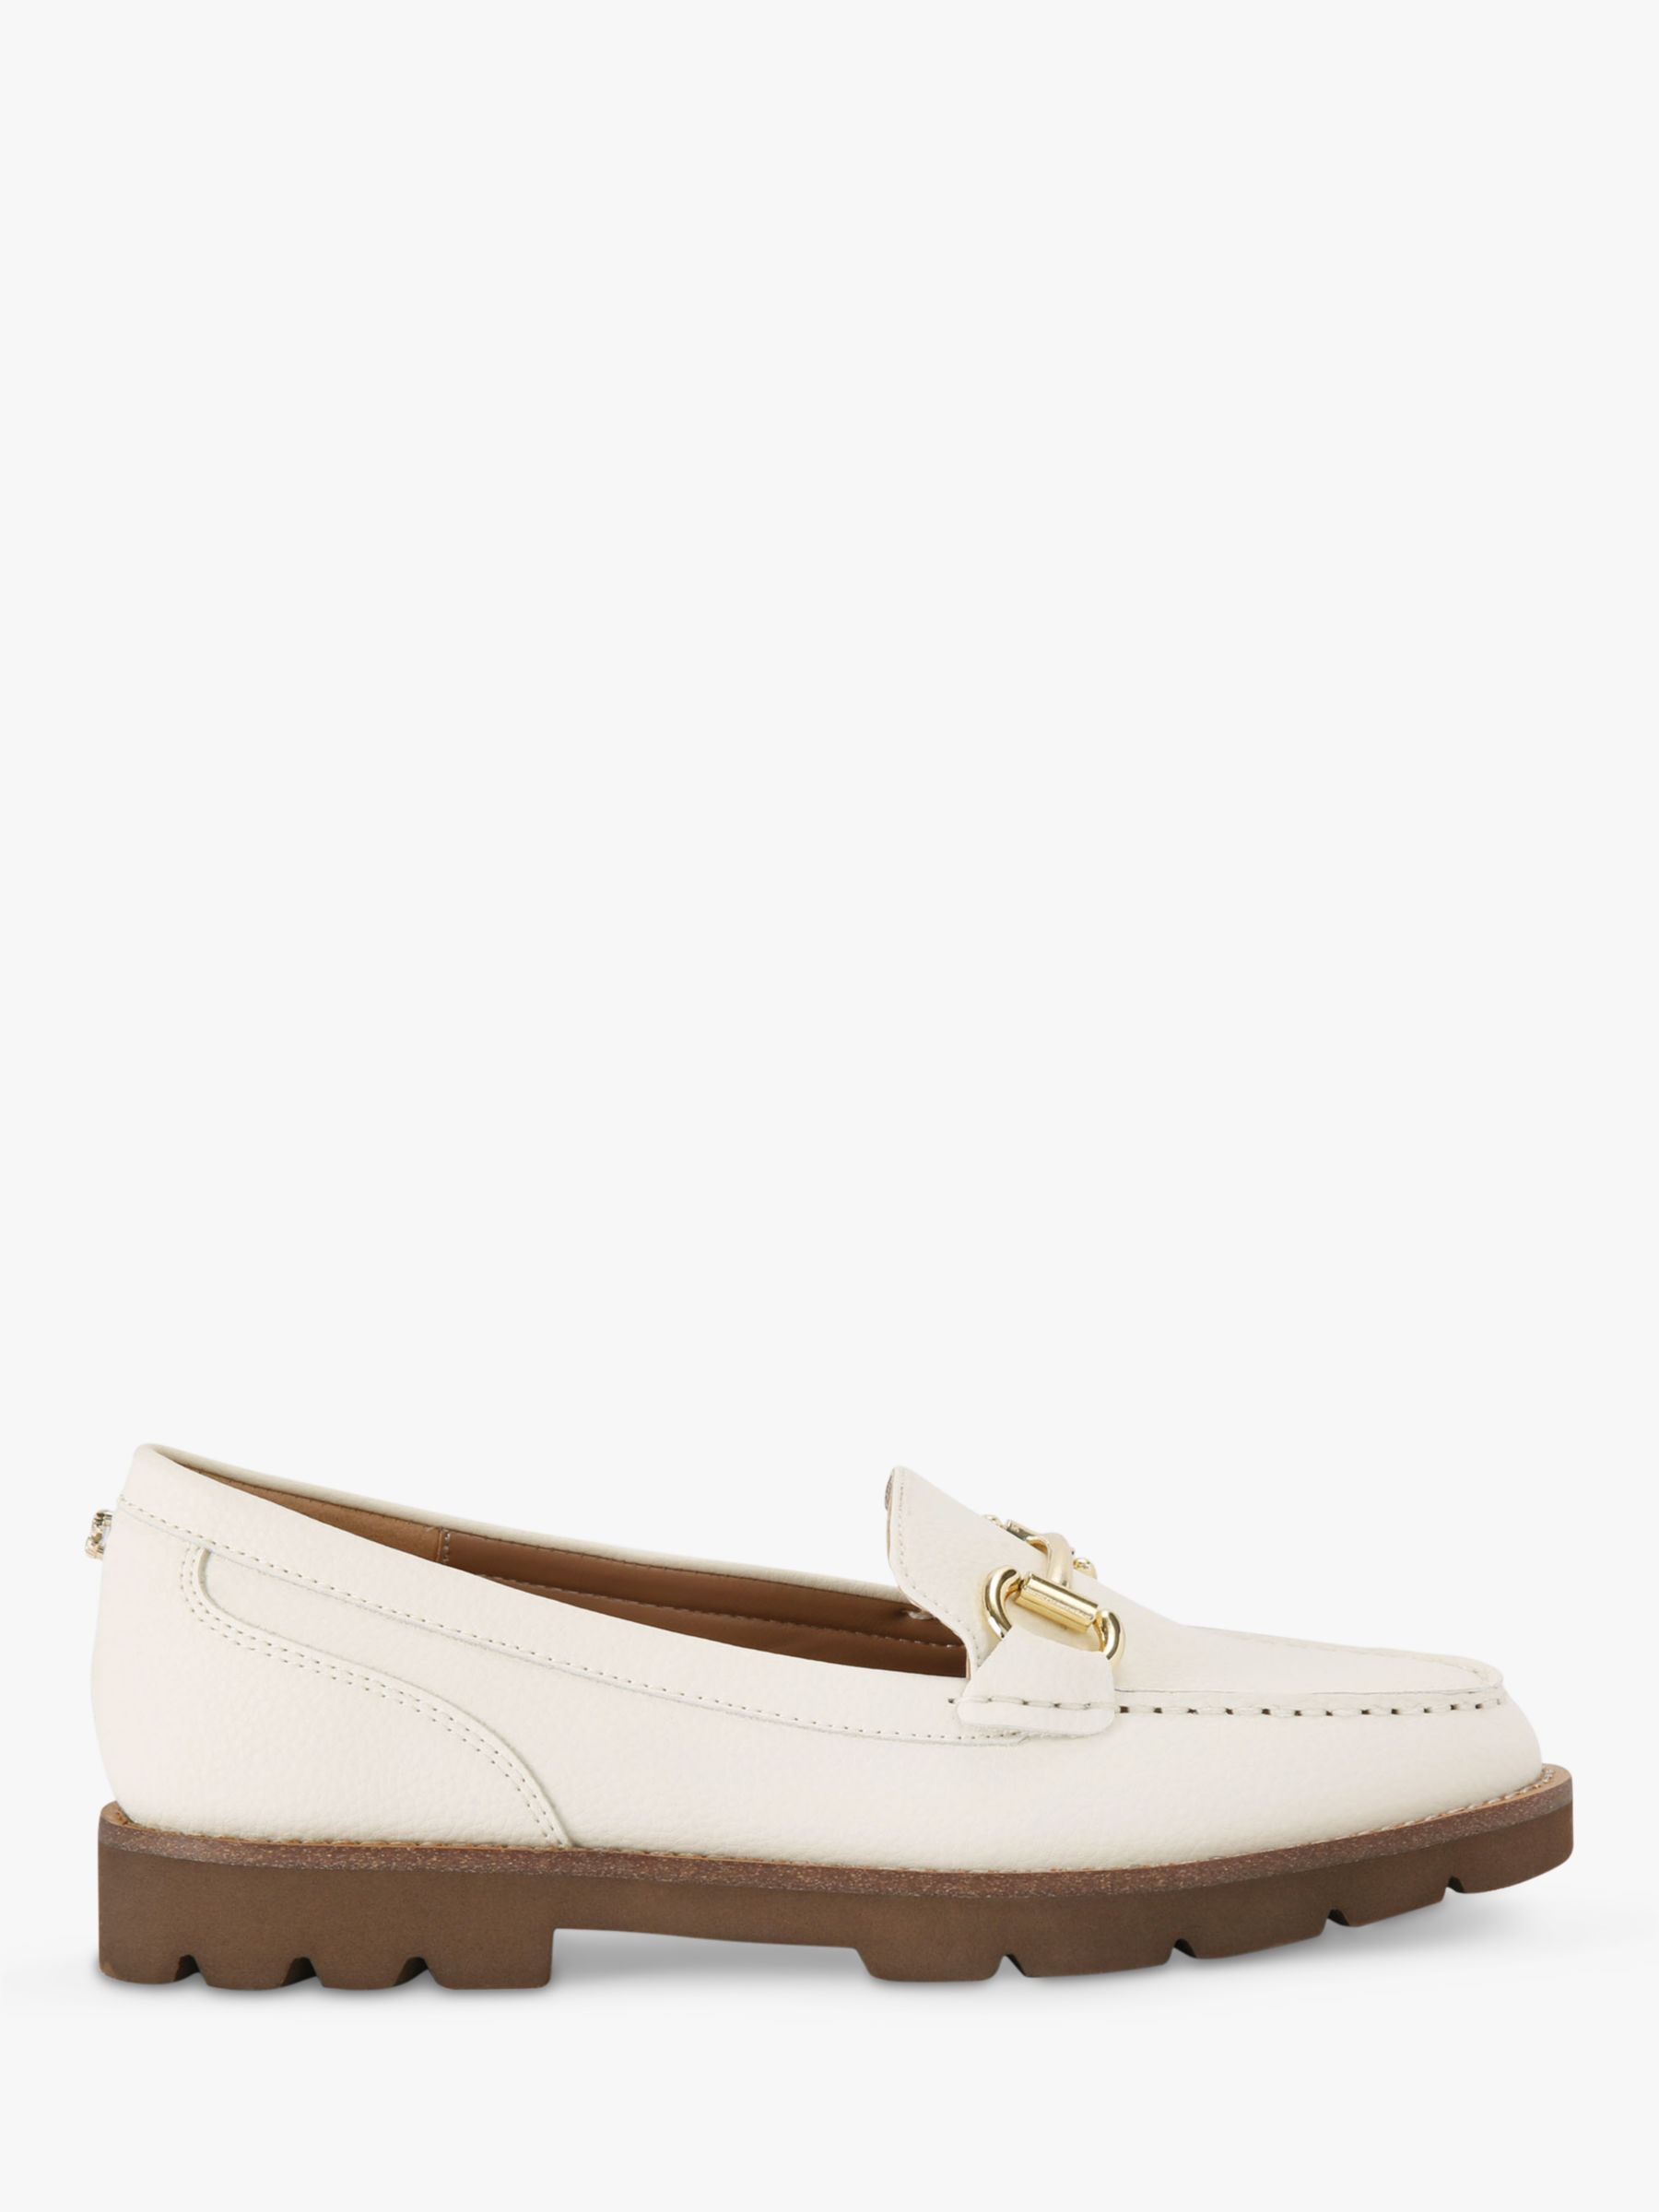 Carvela Crown Loafers, Natural Putty at John Lewis & Partners